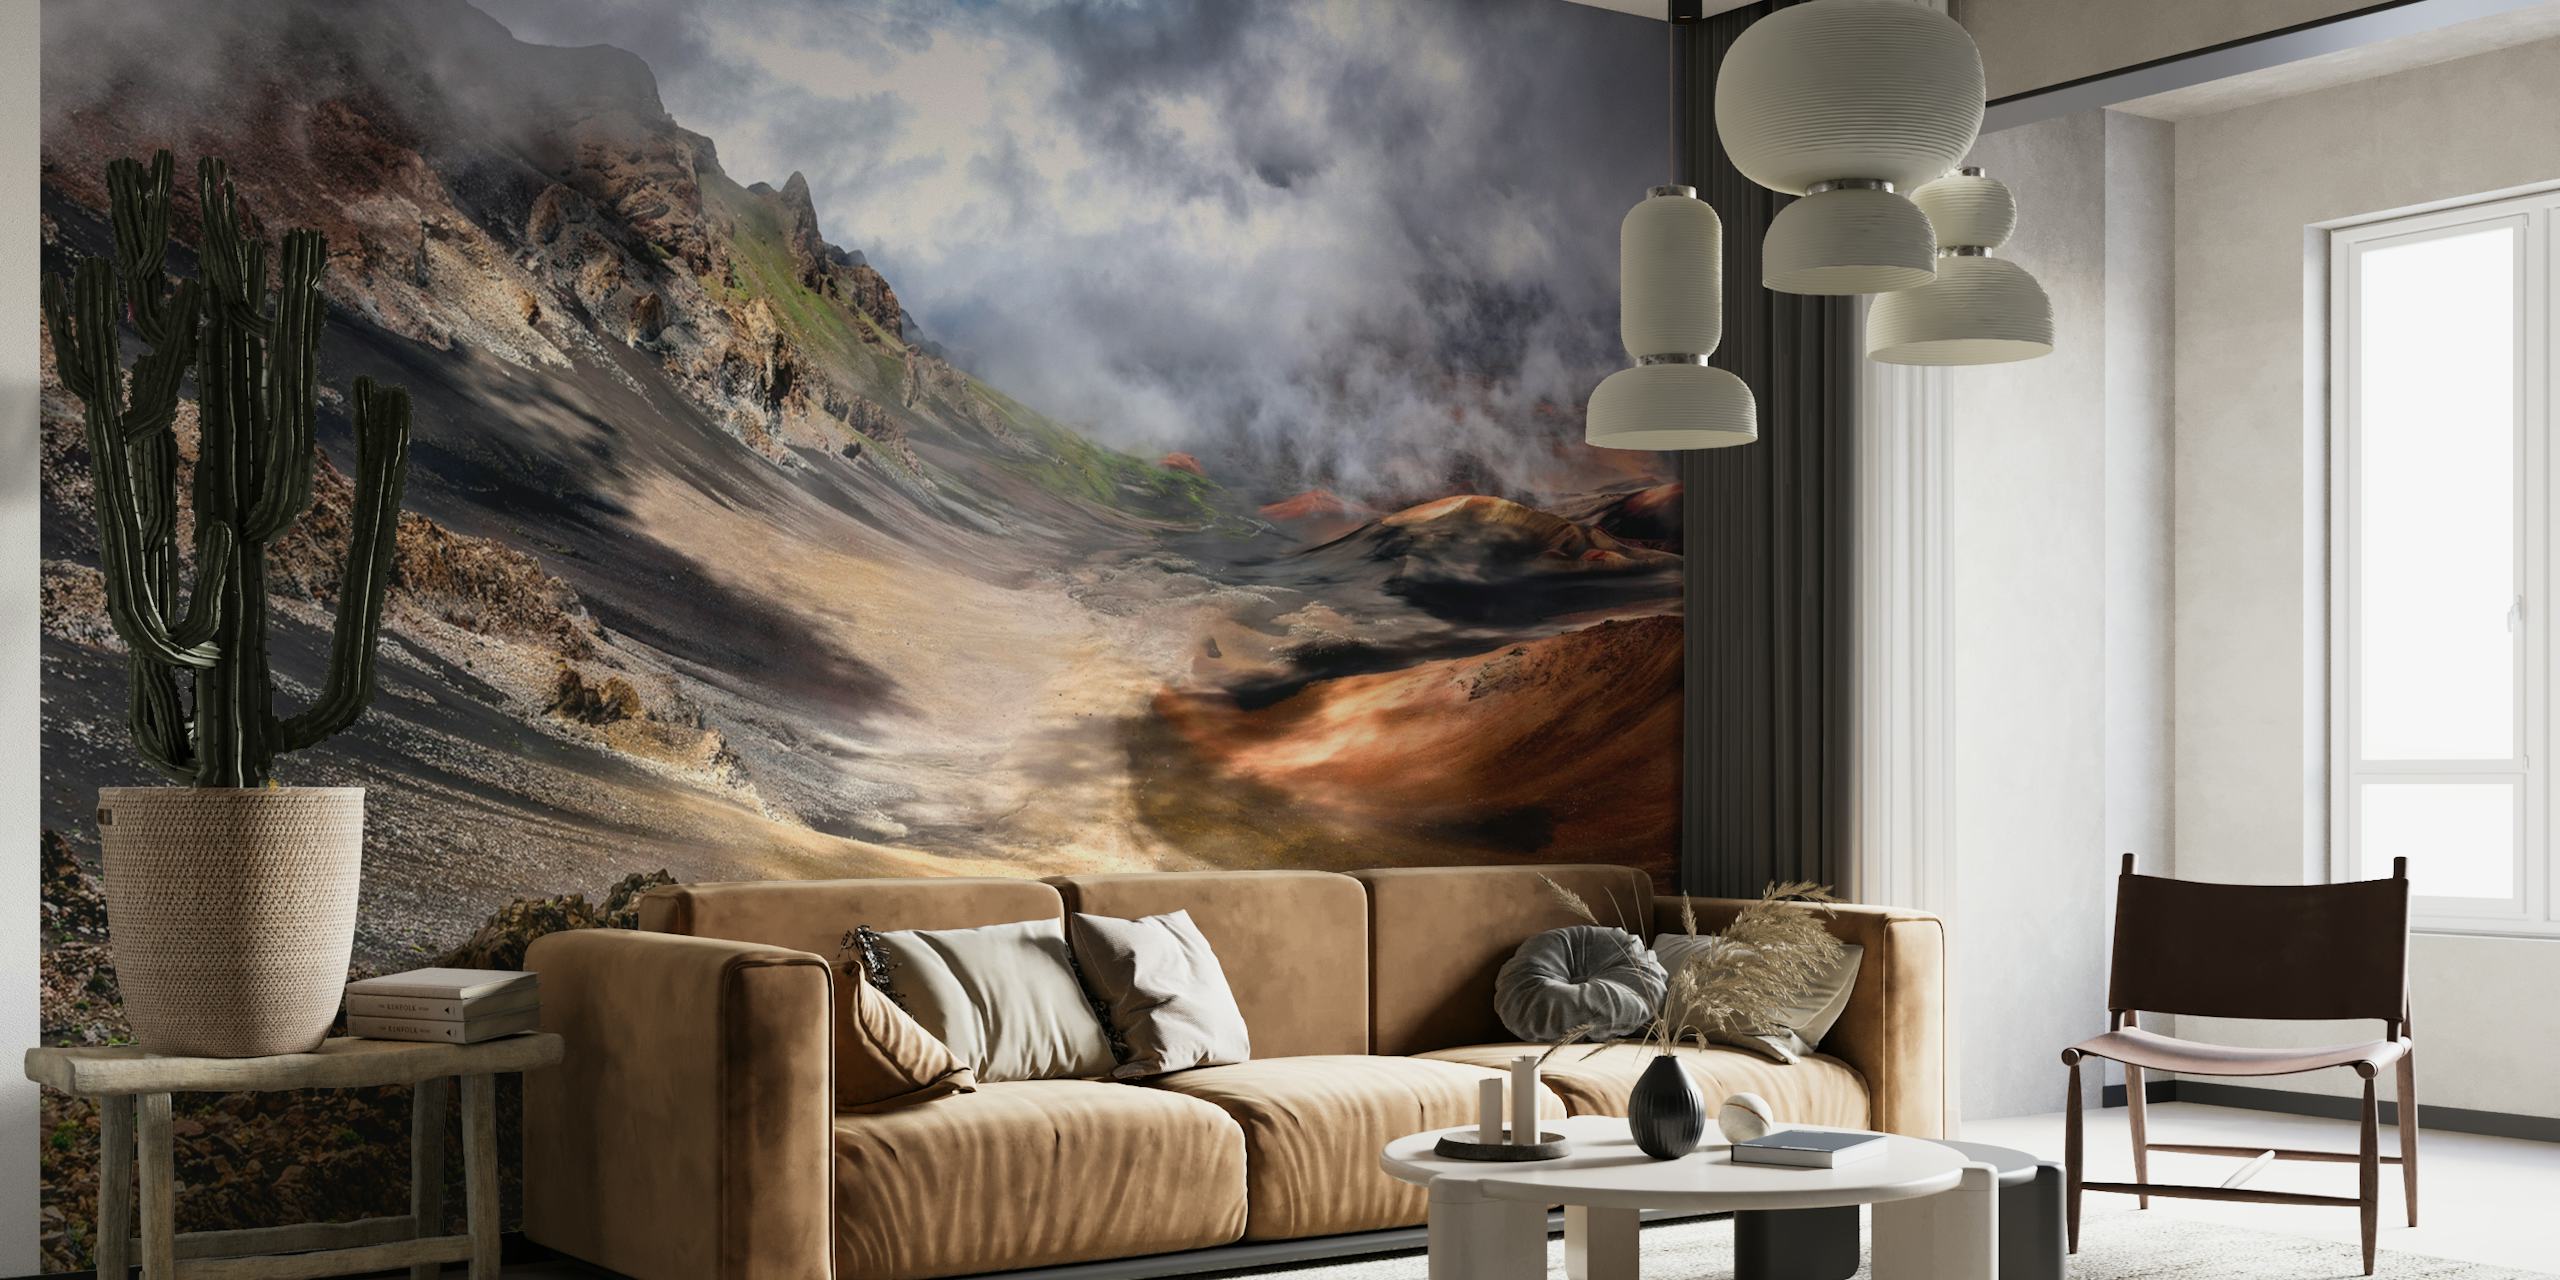 Wall mural of a dramatic crater landscape with cloudy skies